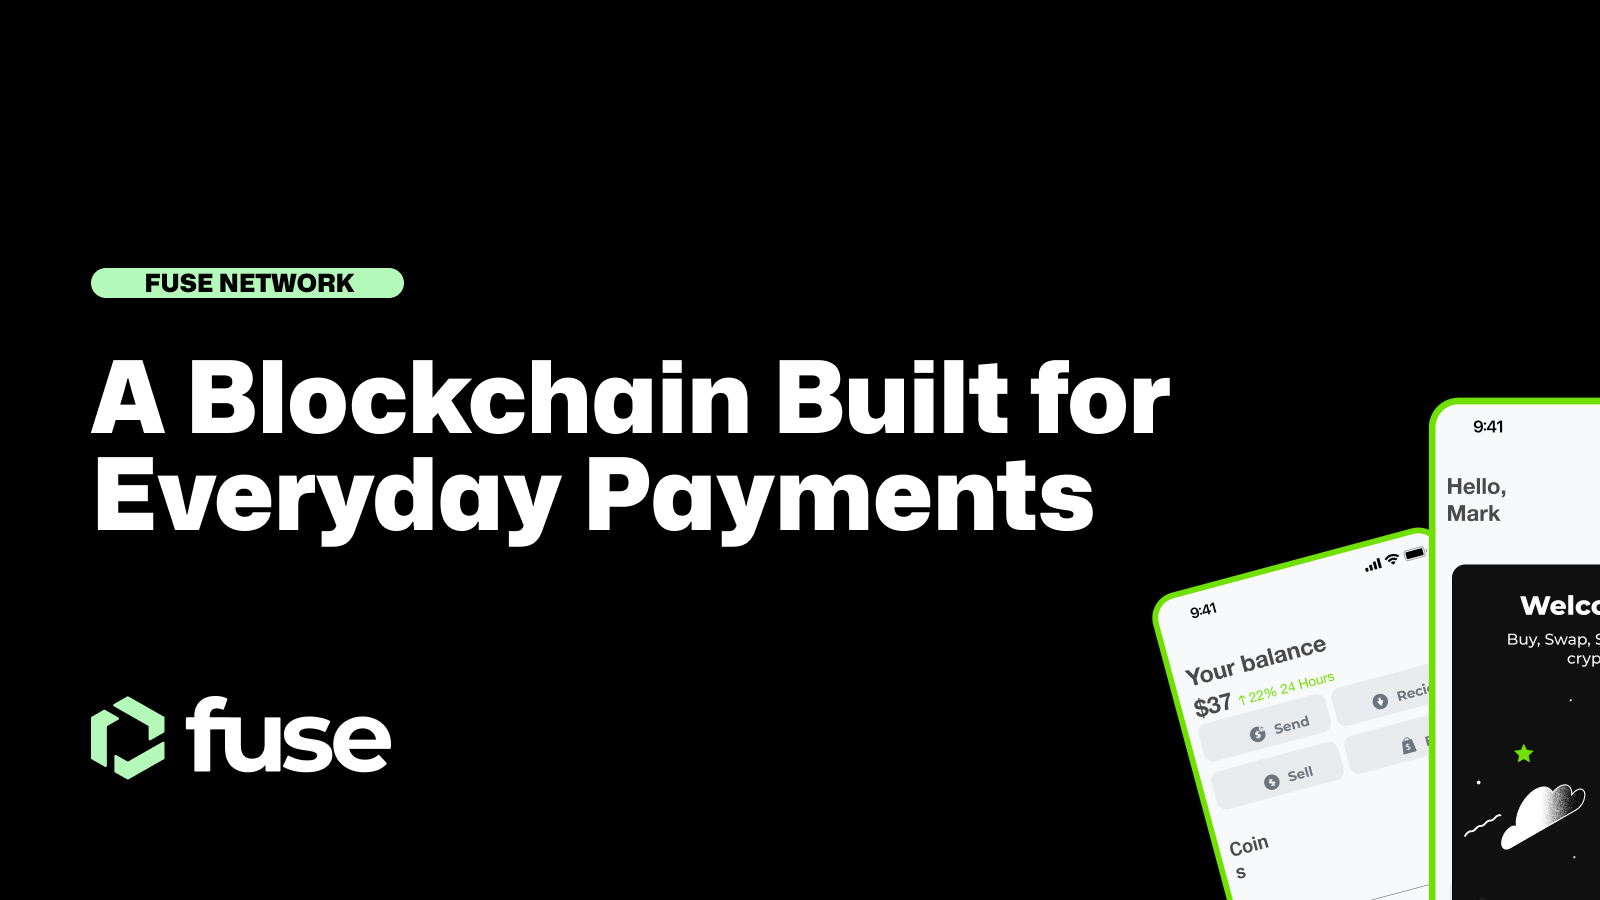 Blockchain for Payments